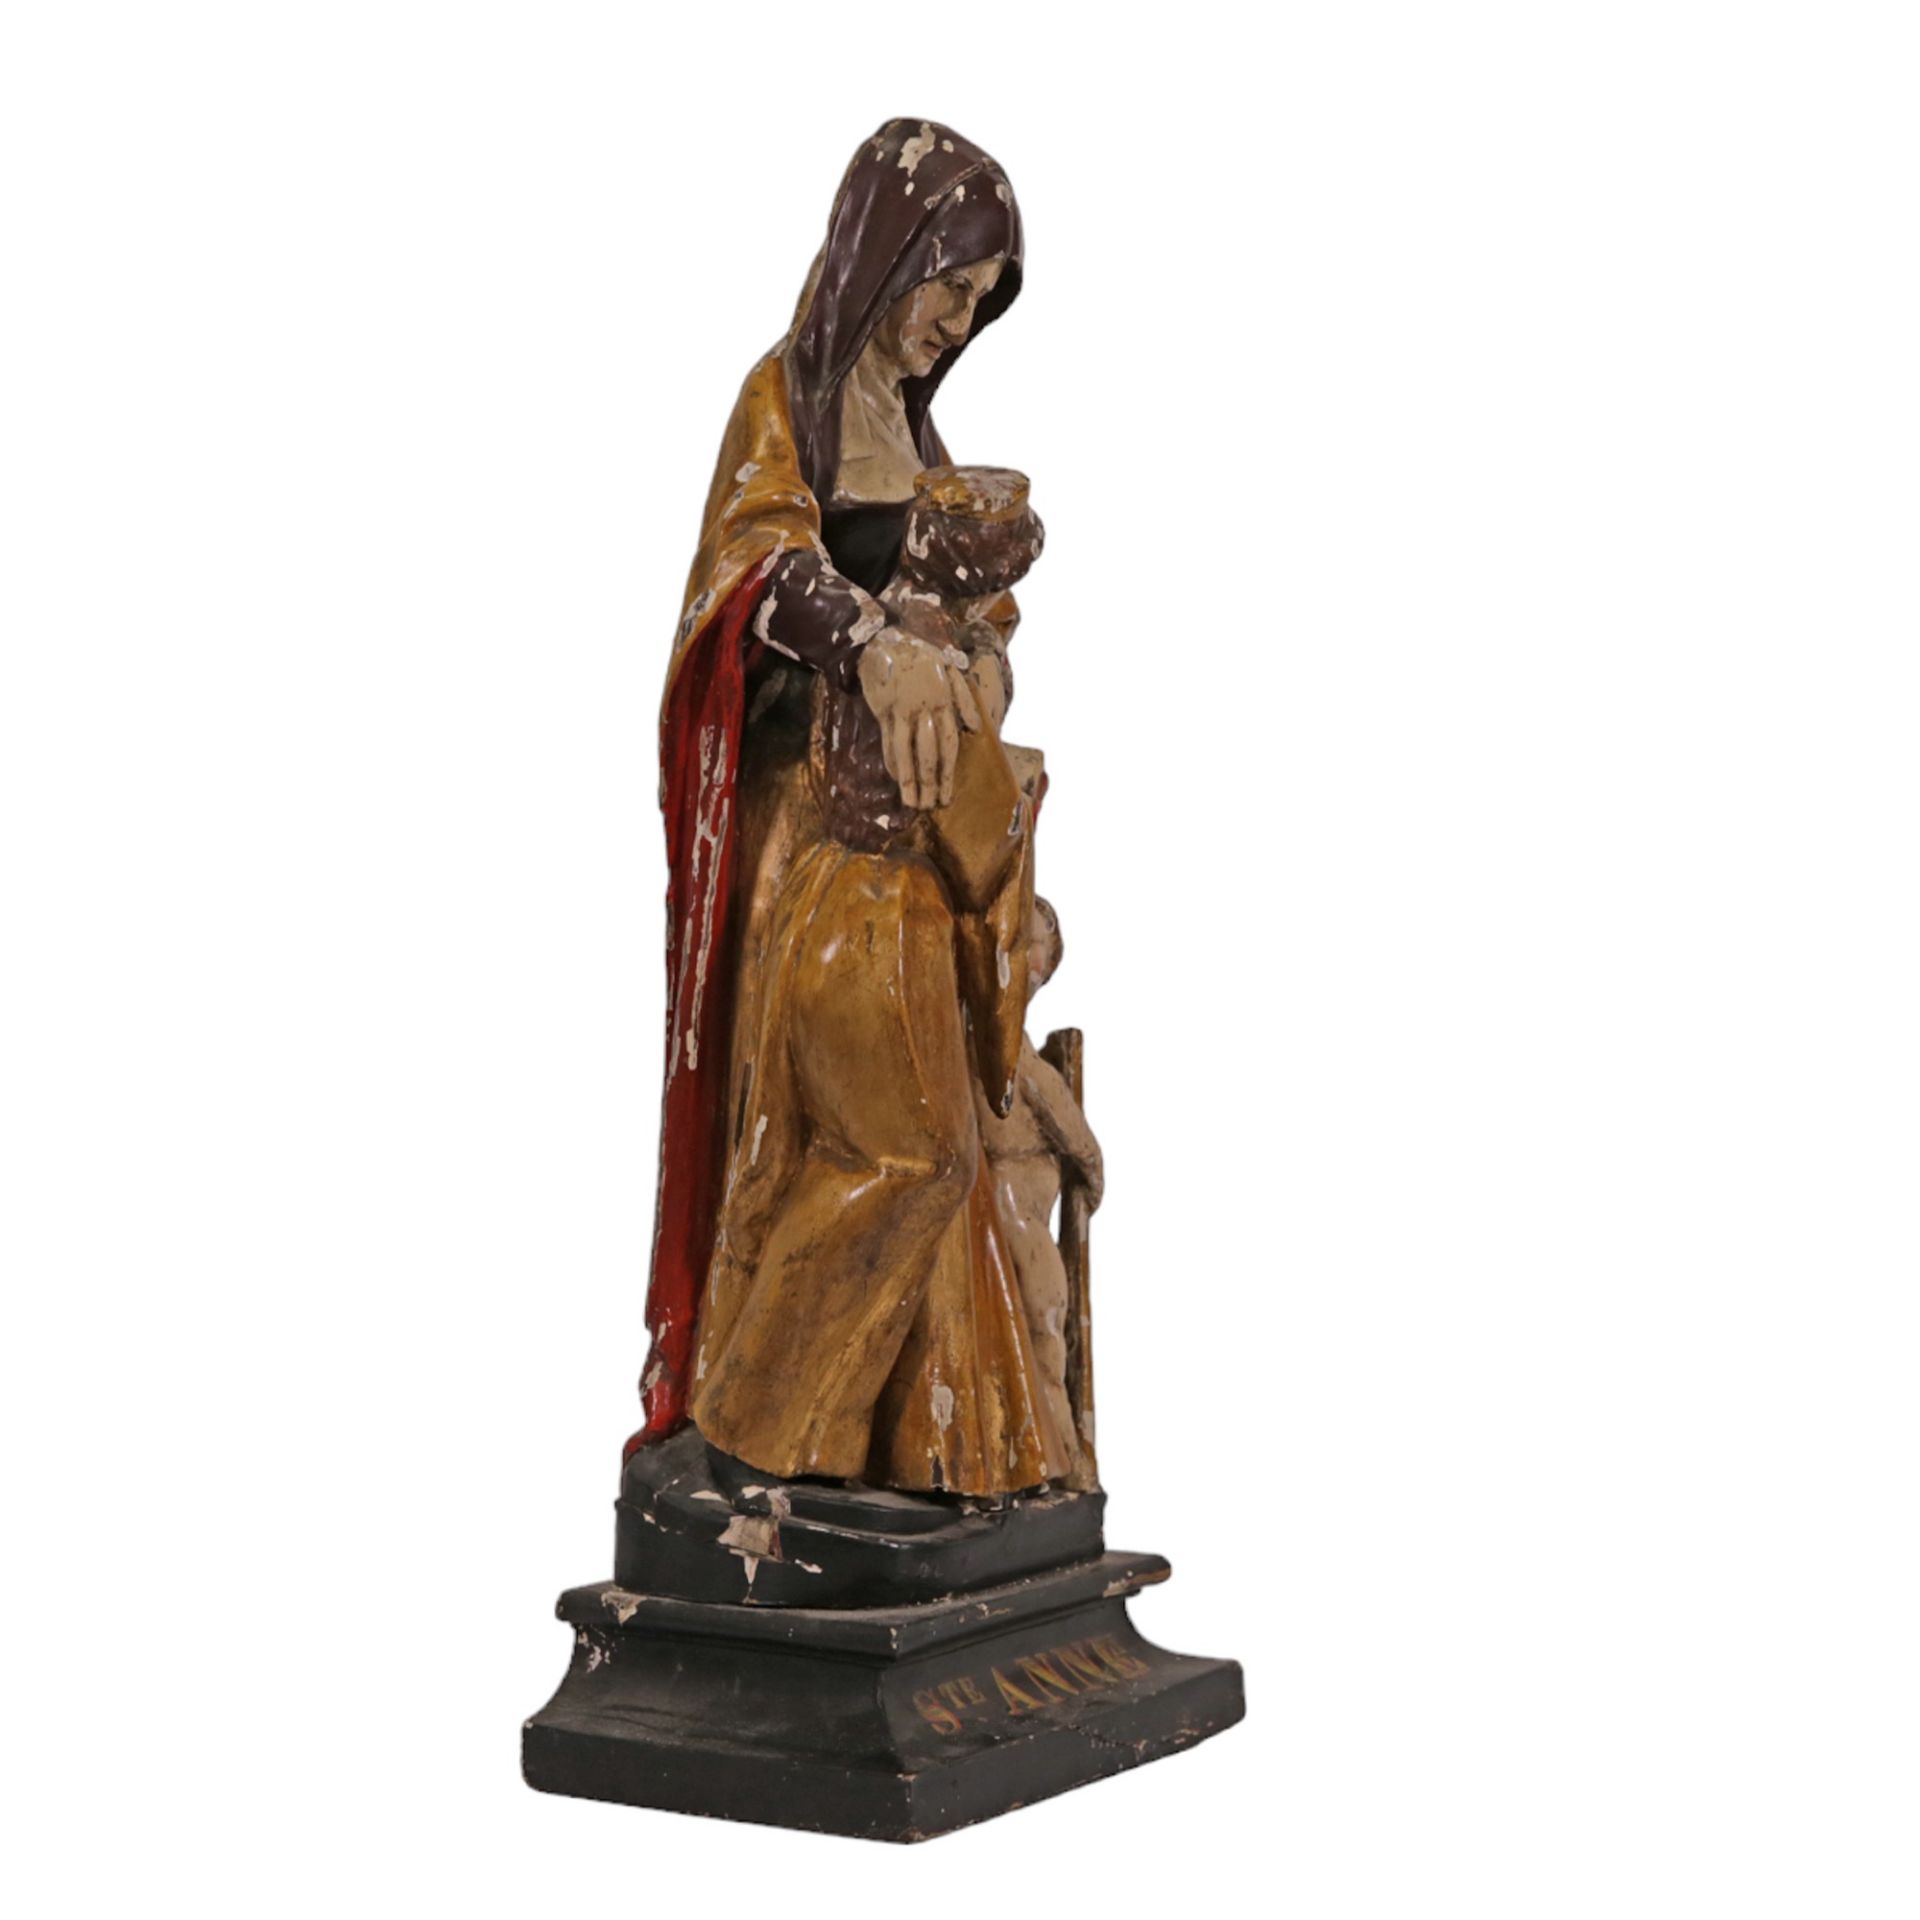 RARE, ANTIQUE, POLYCHROME WOODEN SCULPTURE "SAINT ANNE TRINITI", ON THE BASIS. FRANCE 19th CENTURY. - Image 10 of 13